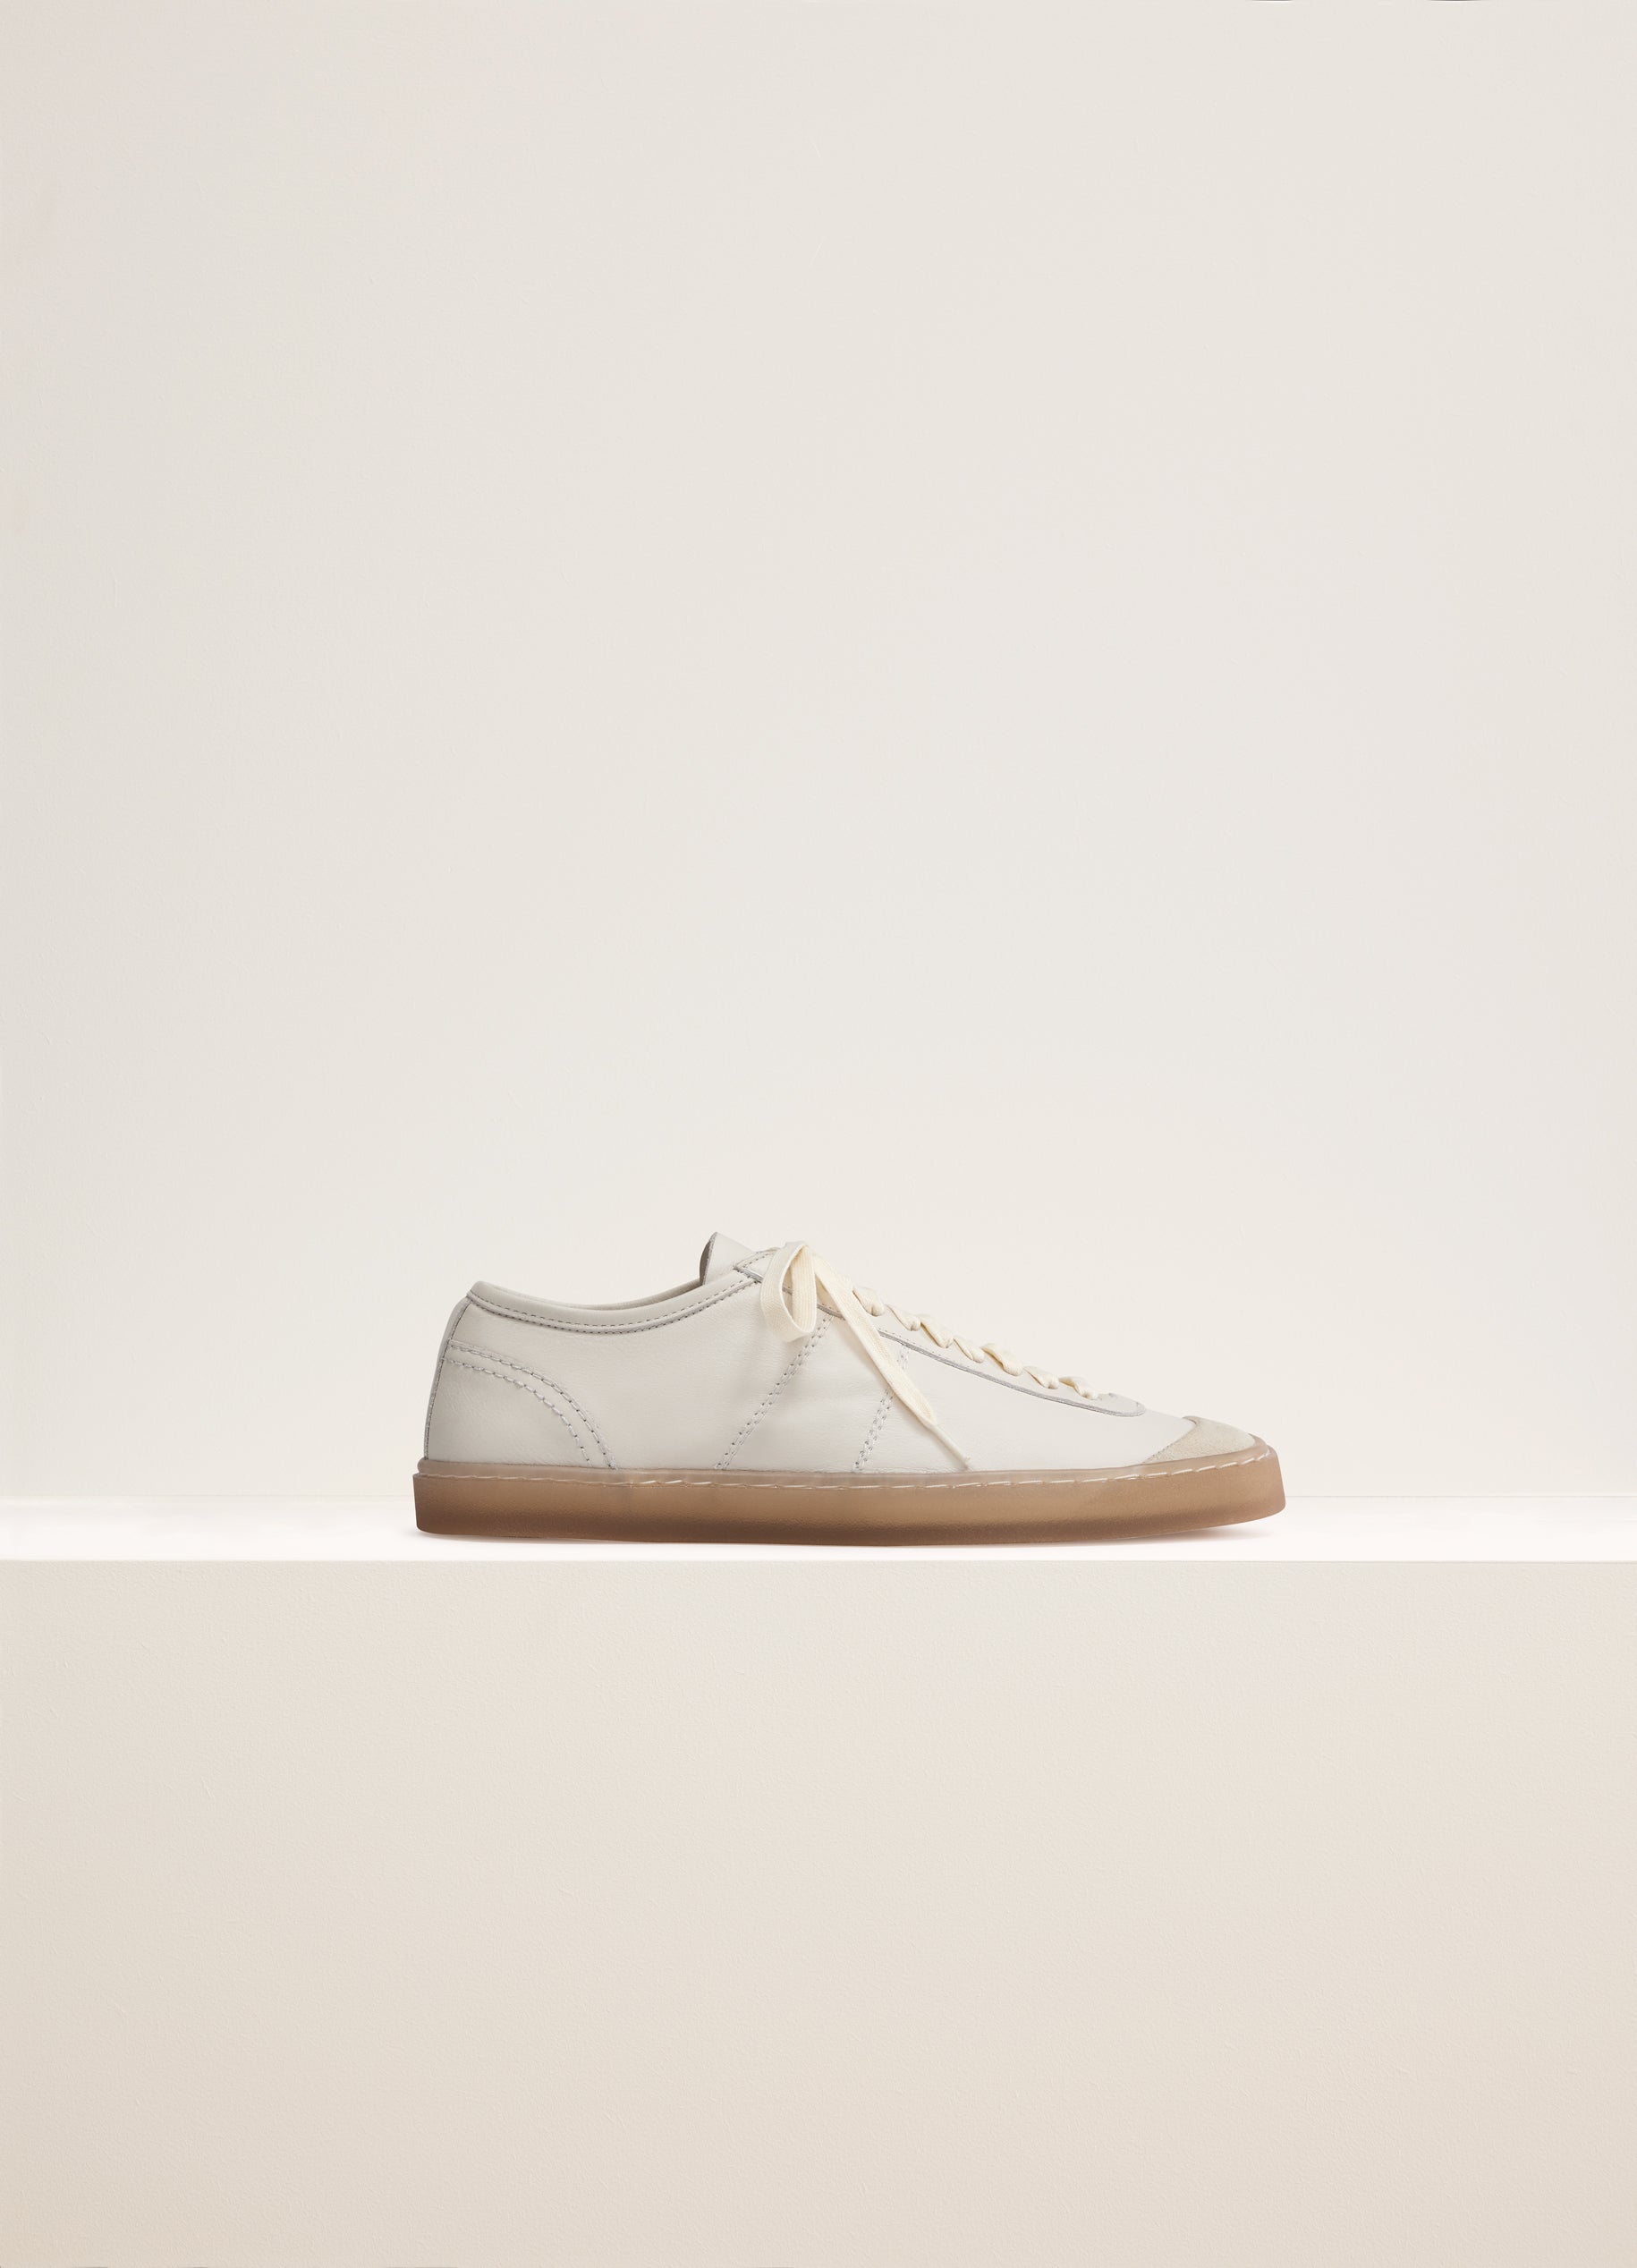 LEMAIRE Laced Soft Clay | in White Trainers Linoleum Leather Up